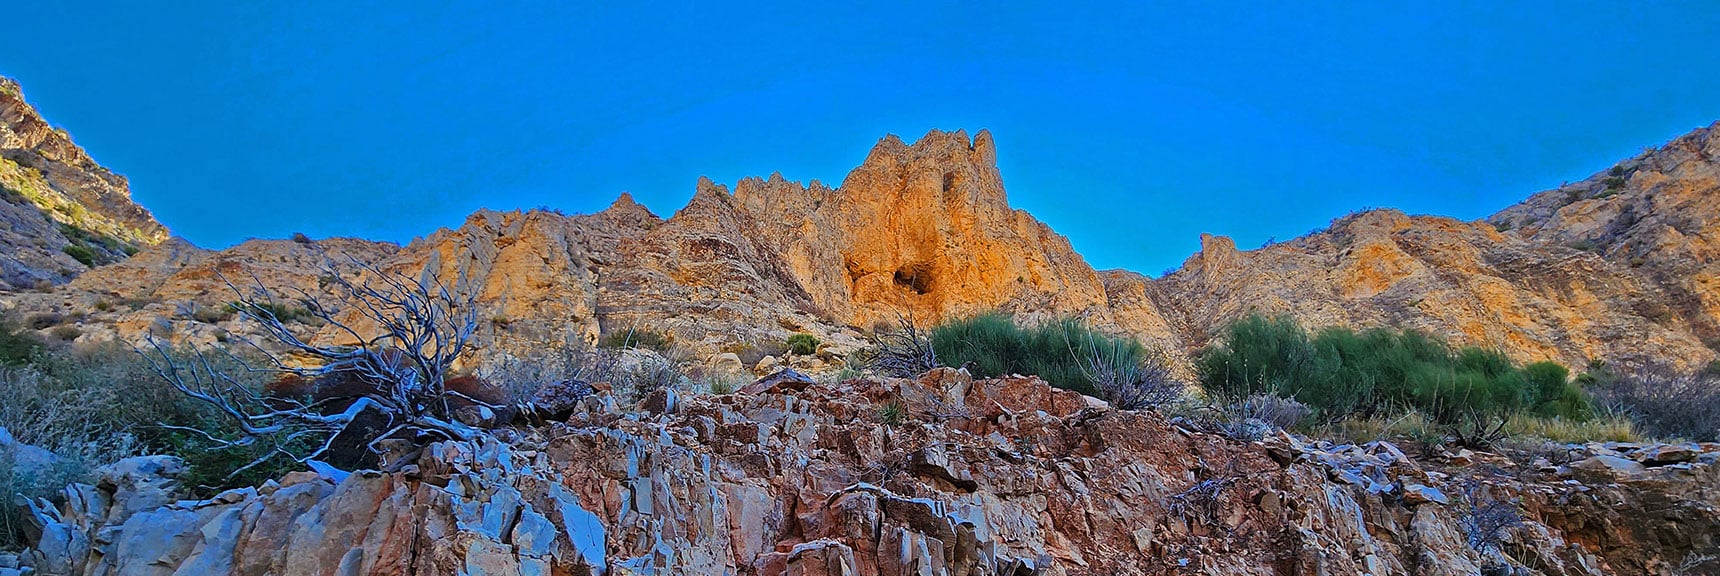 South Wall of Chute Canyon Has Rock Formations with Faces! | Landmark Bluff Summit | Lovell Canyon, Nevada